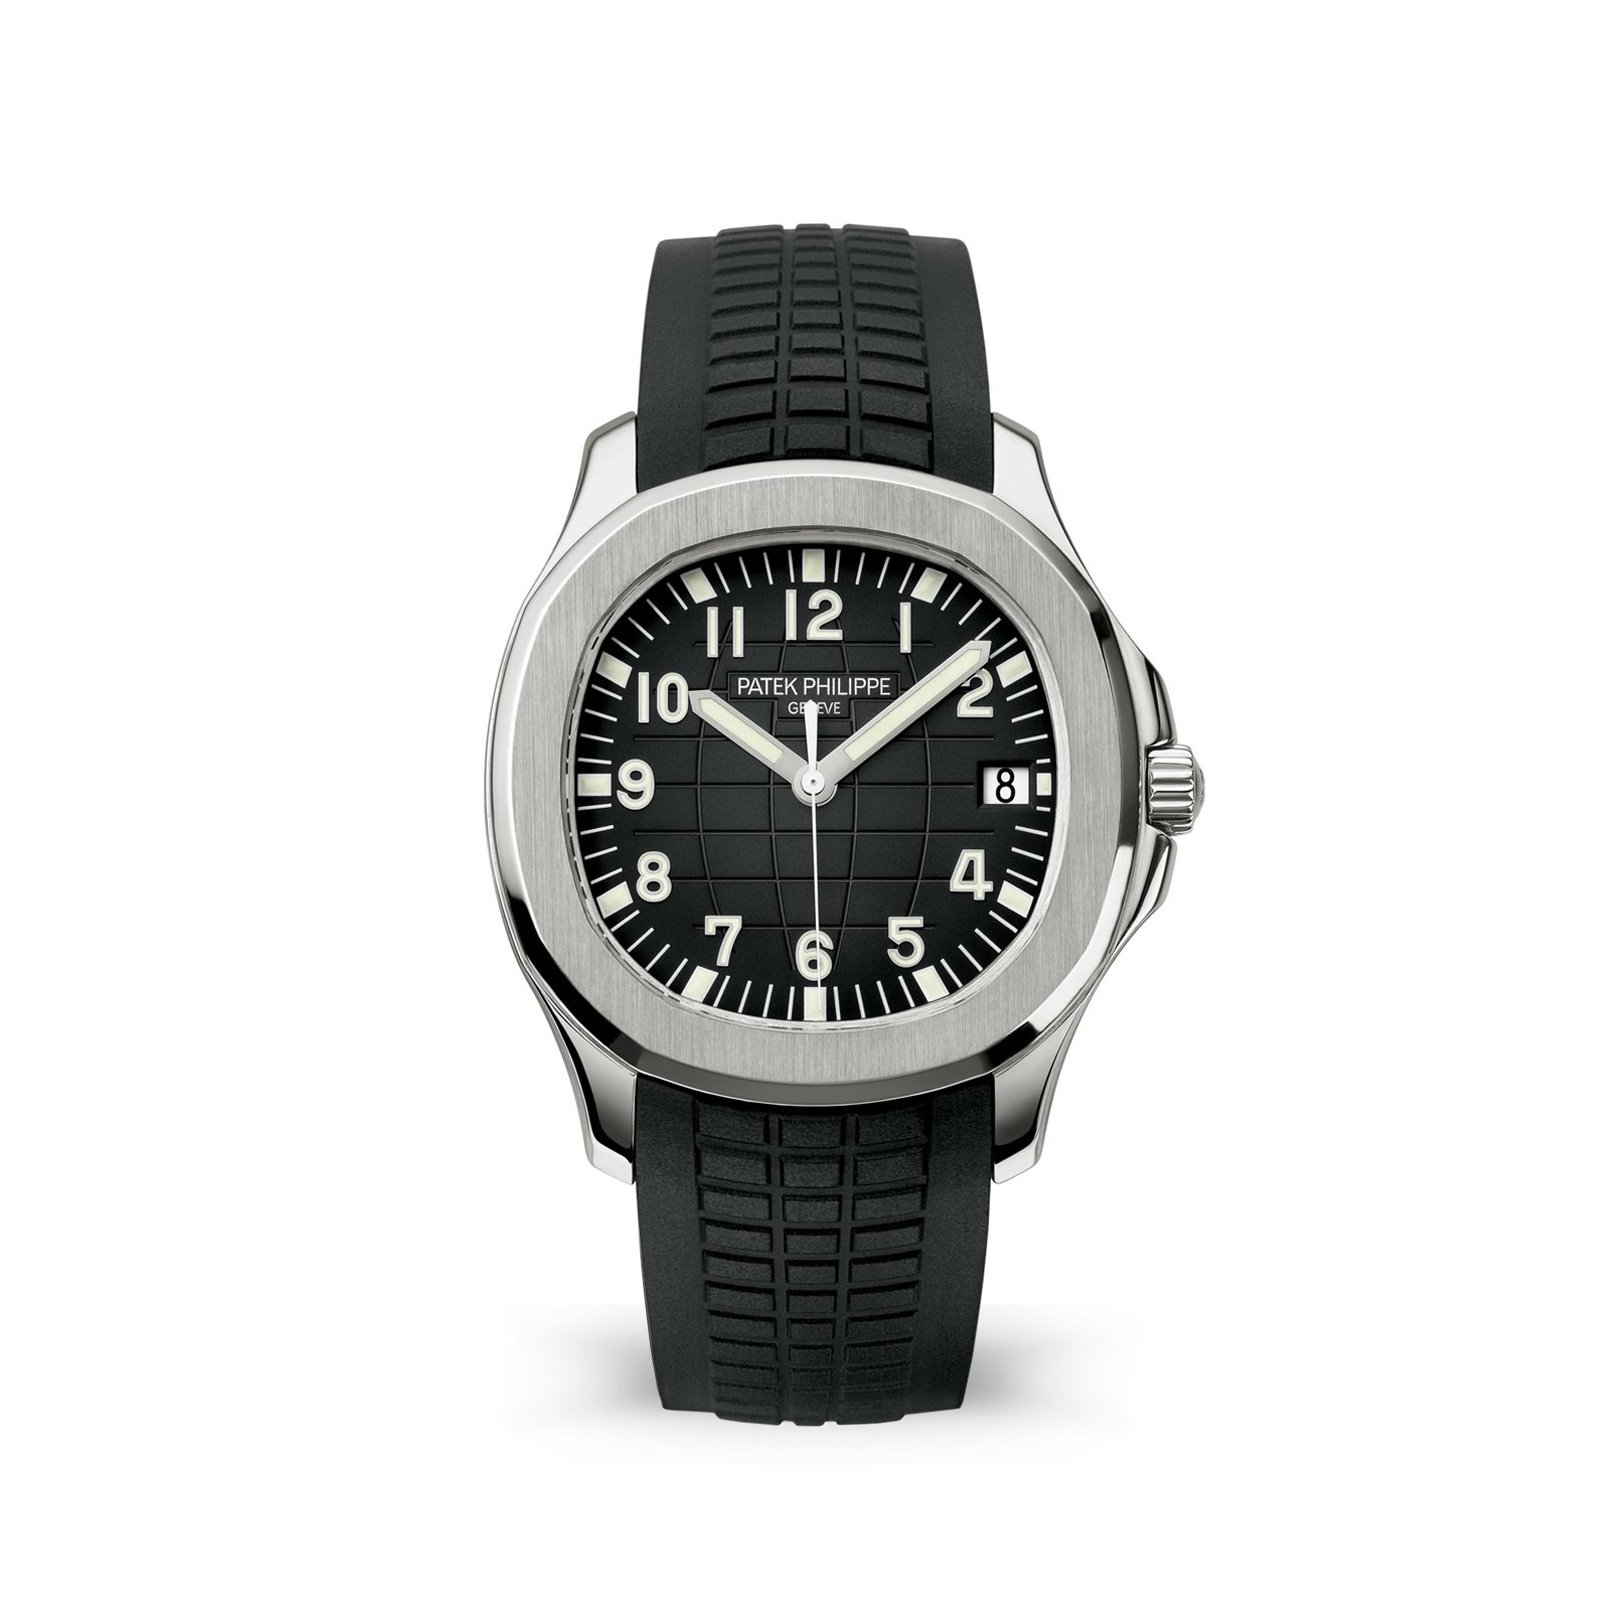 Patek Philippe Aquanaut 5167a 001 Stainless Steel The Hour Glass Australia